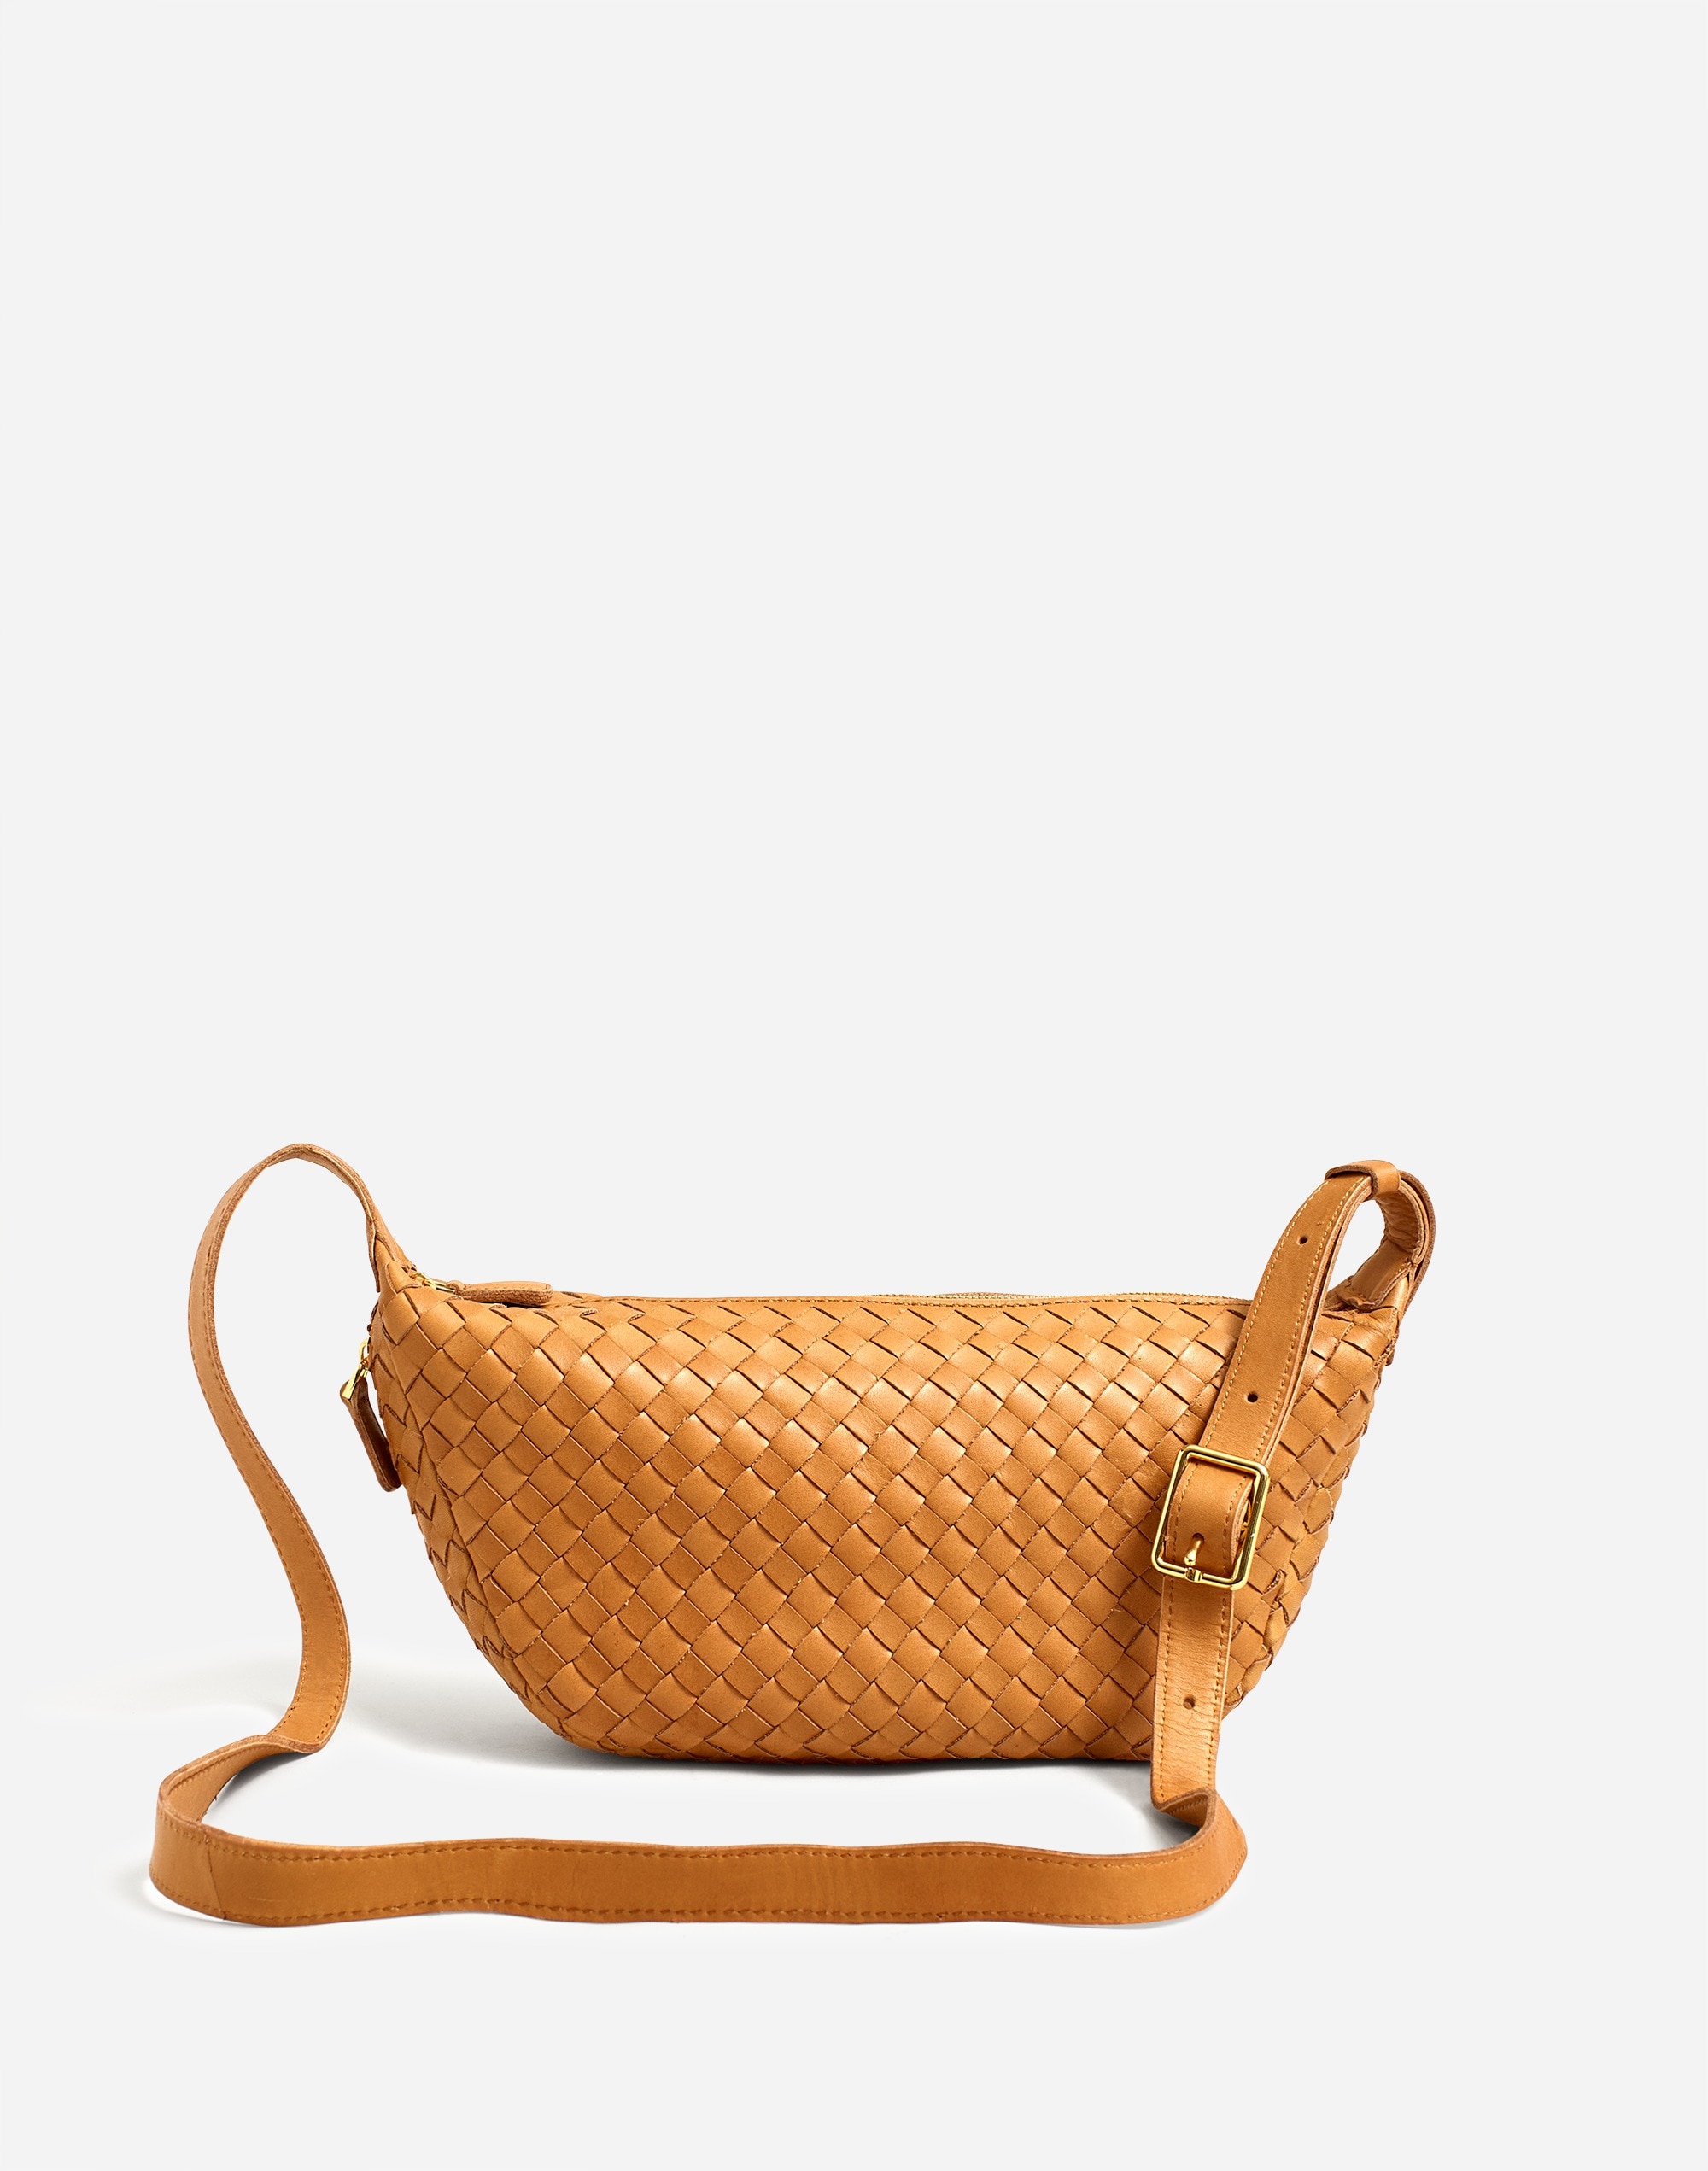 The Sling Crossbody Bag in Handwoven Leather | Madewell